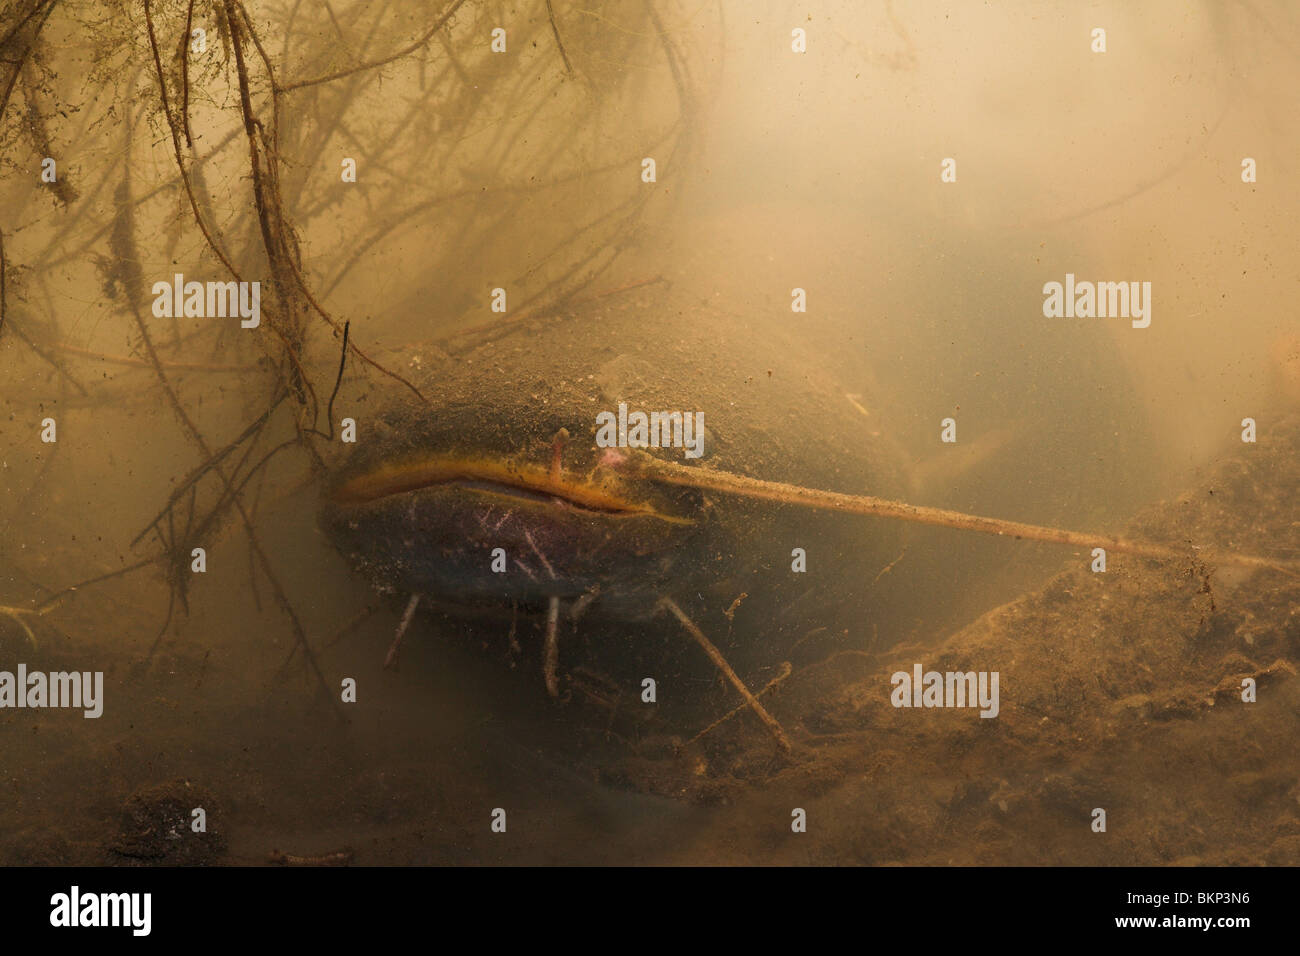 photo of a Wels Catfish hiding between roots on a muddy bottom Stock Photo